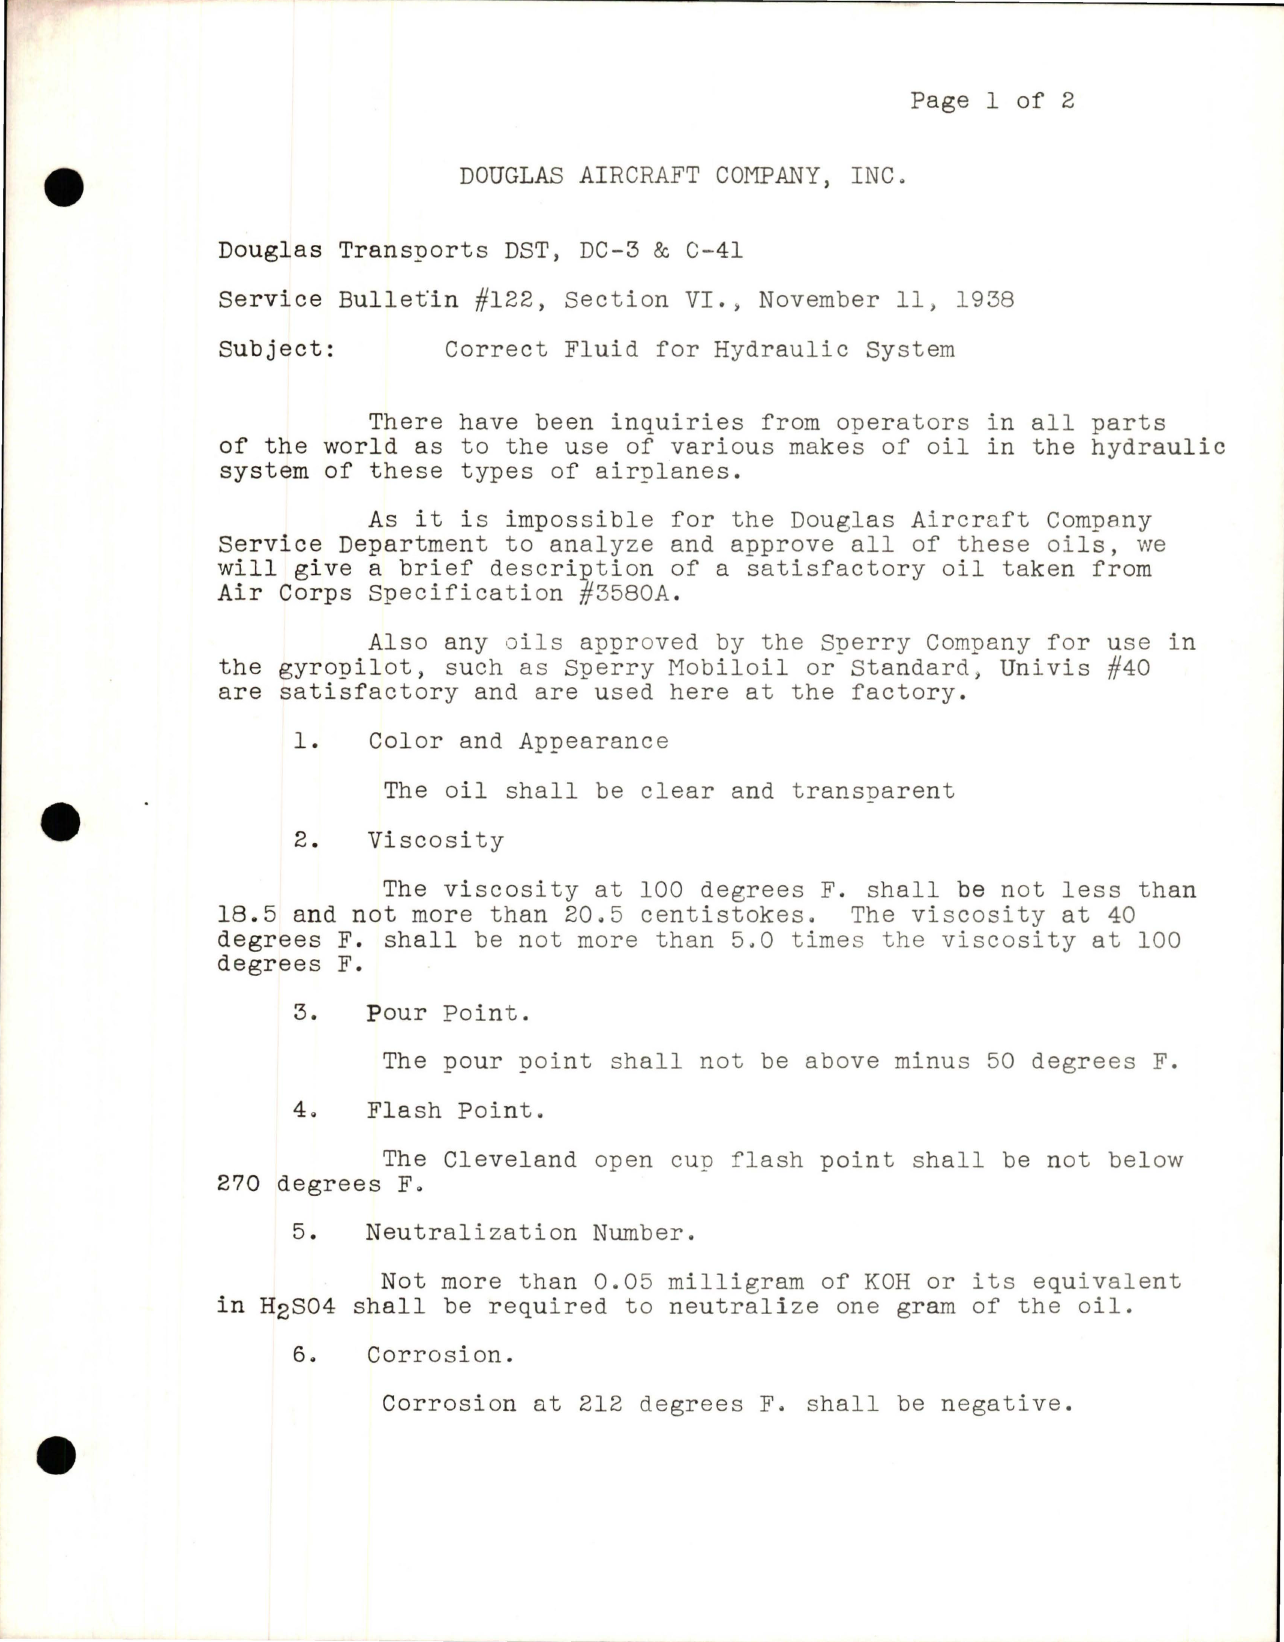 Sample page 1 from AirCorps Library document: Correct Fluid for Hydraulic System